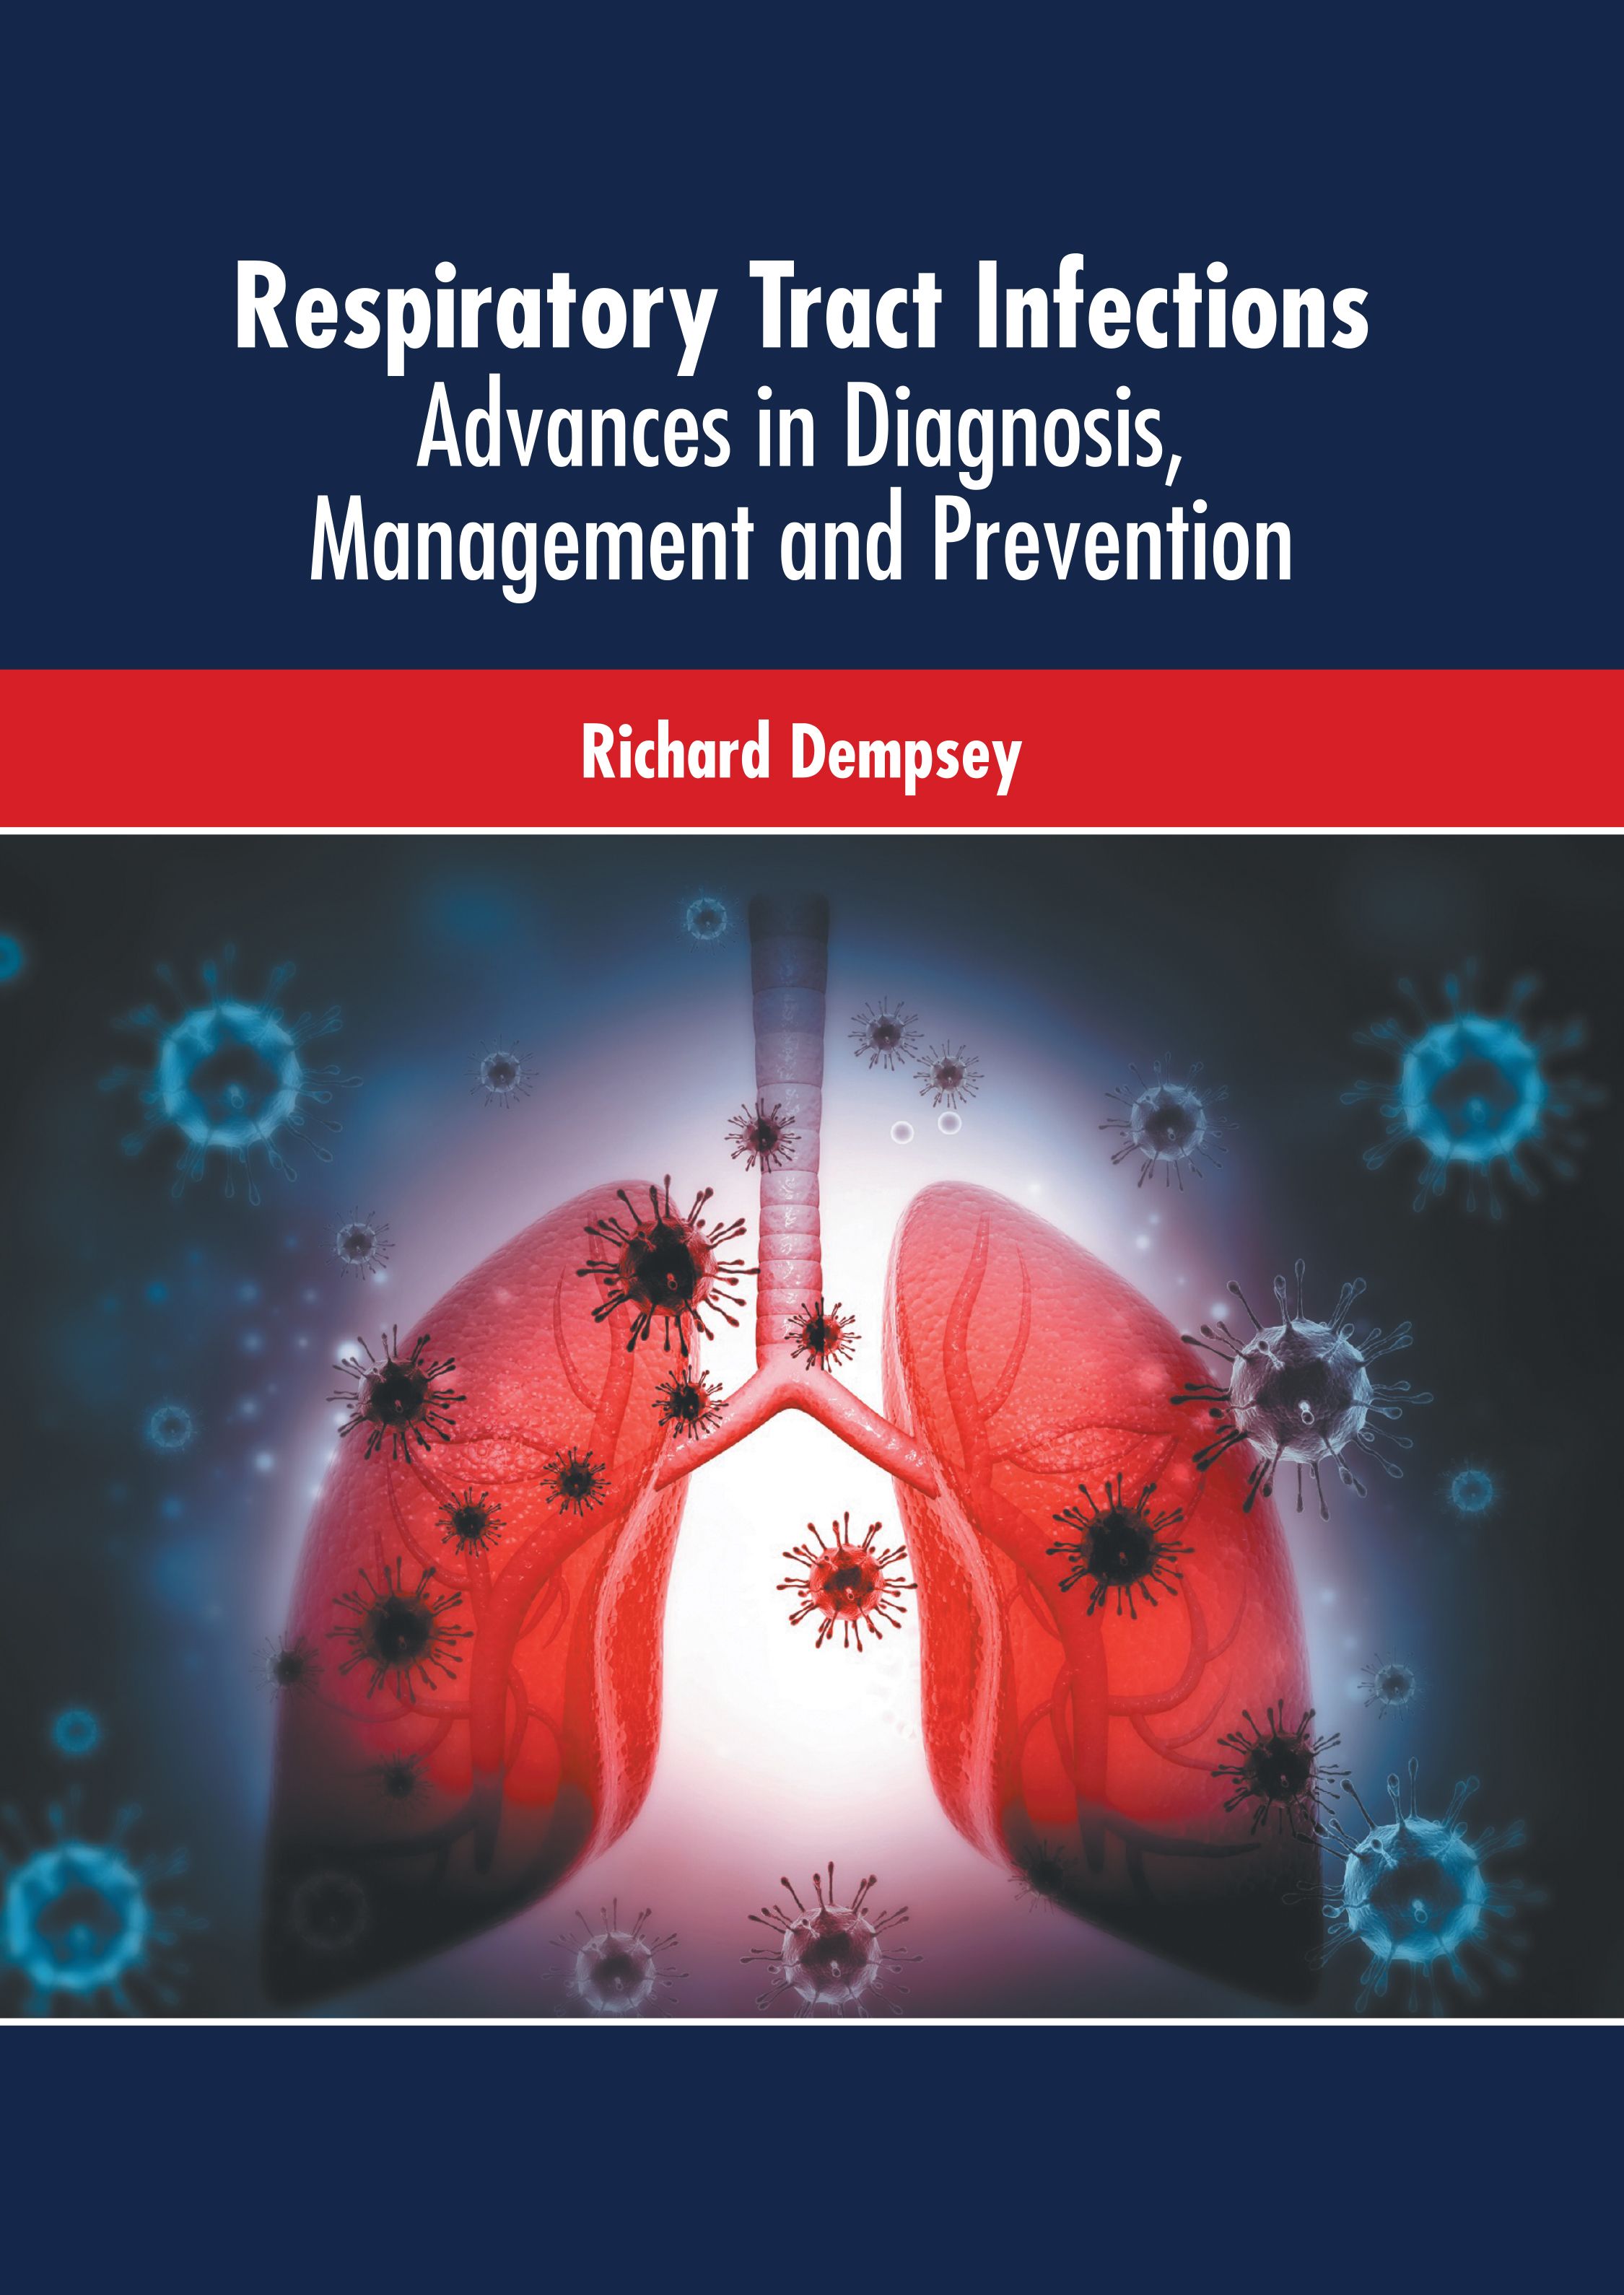 RESPIRATORY TRACT INFECTIONS: ADVANCES IN DIAGNOSIS, MANAGEMENT AND PREVENTION